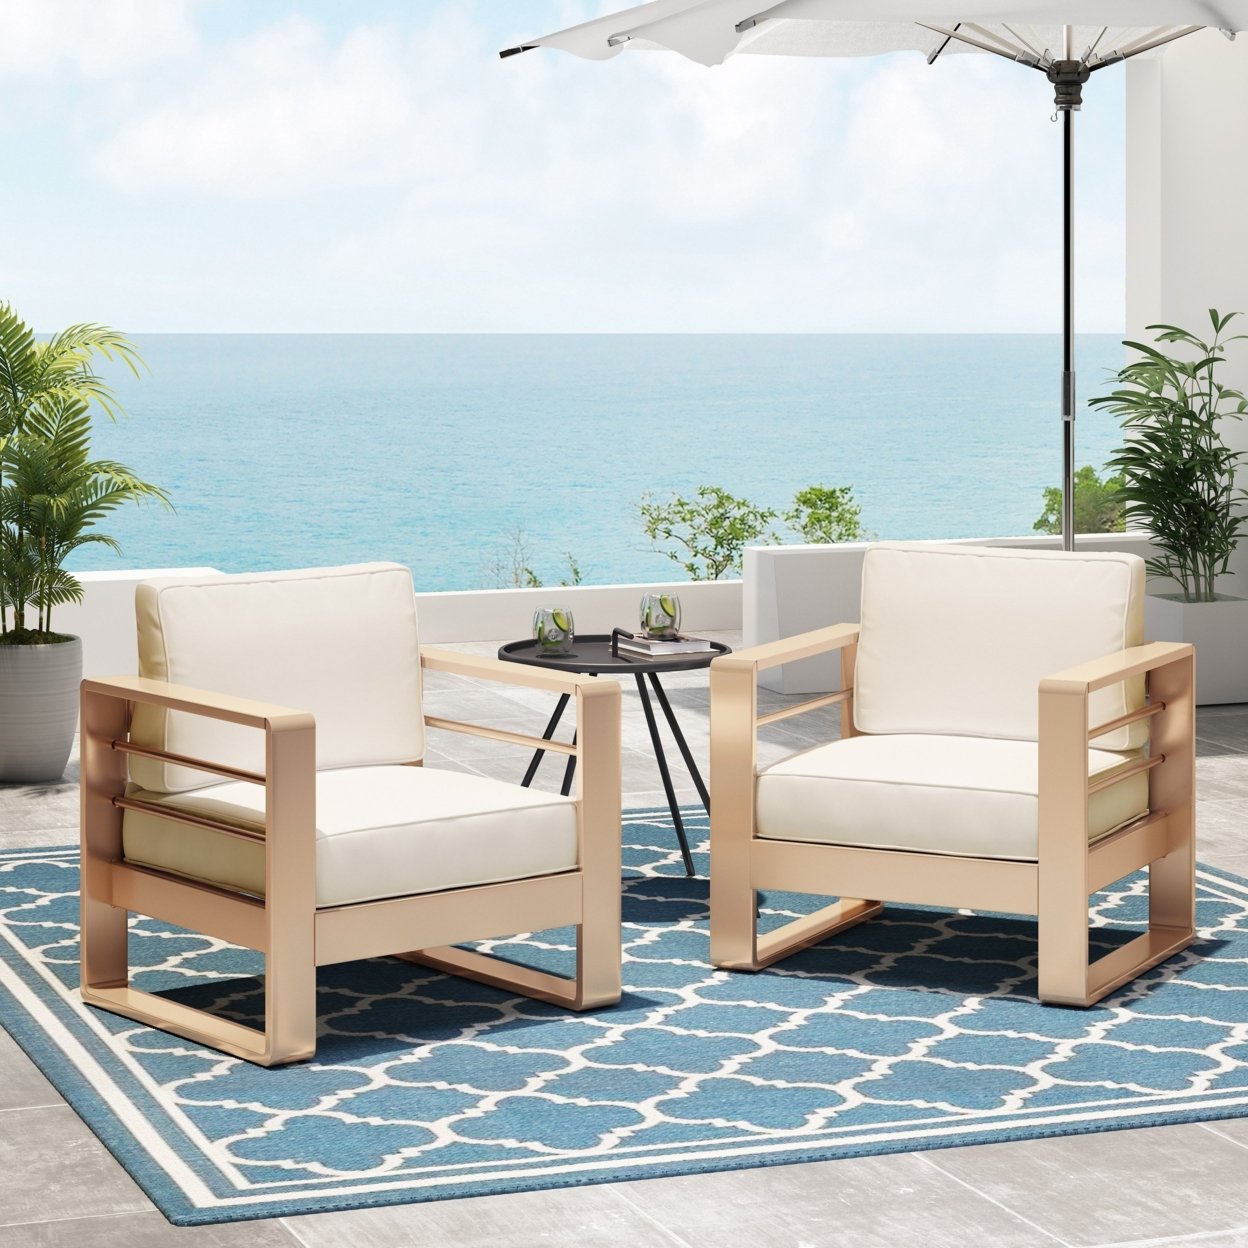 Gadd Outdoor Aluminum Club Chairs (Set Of 2) - Gold/white